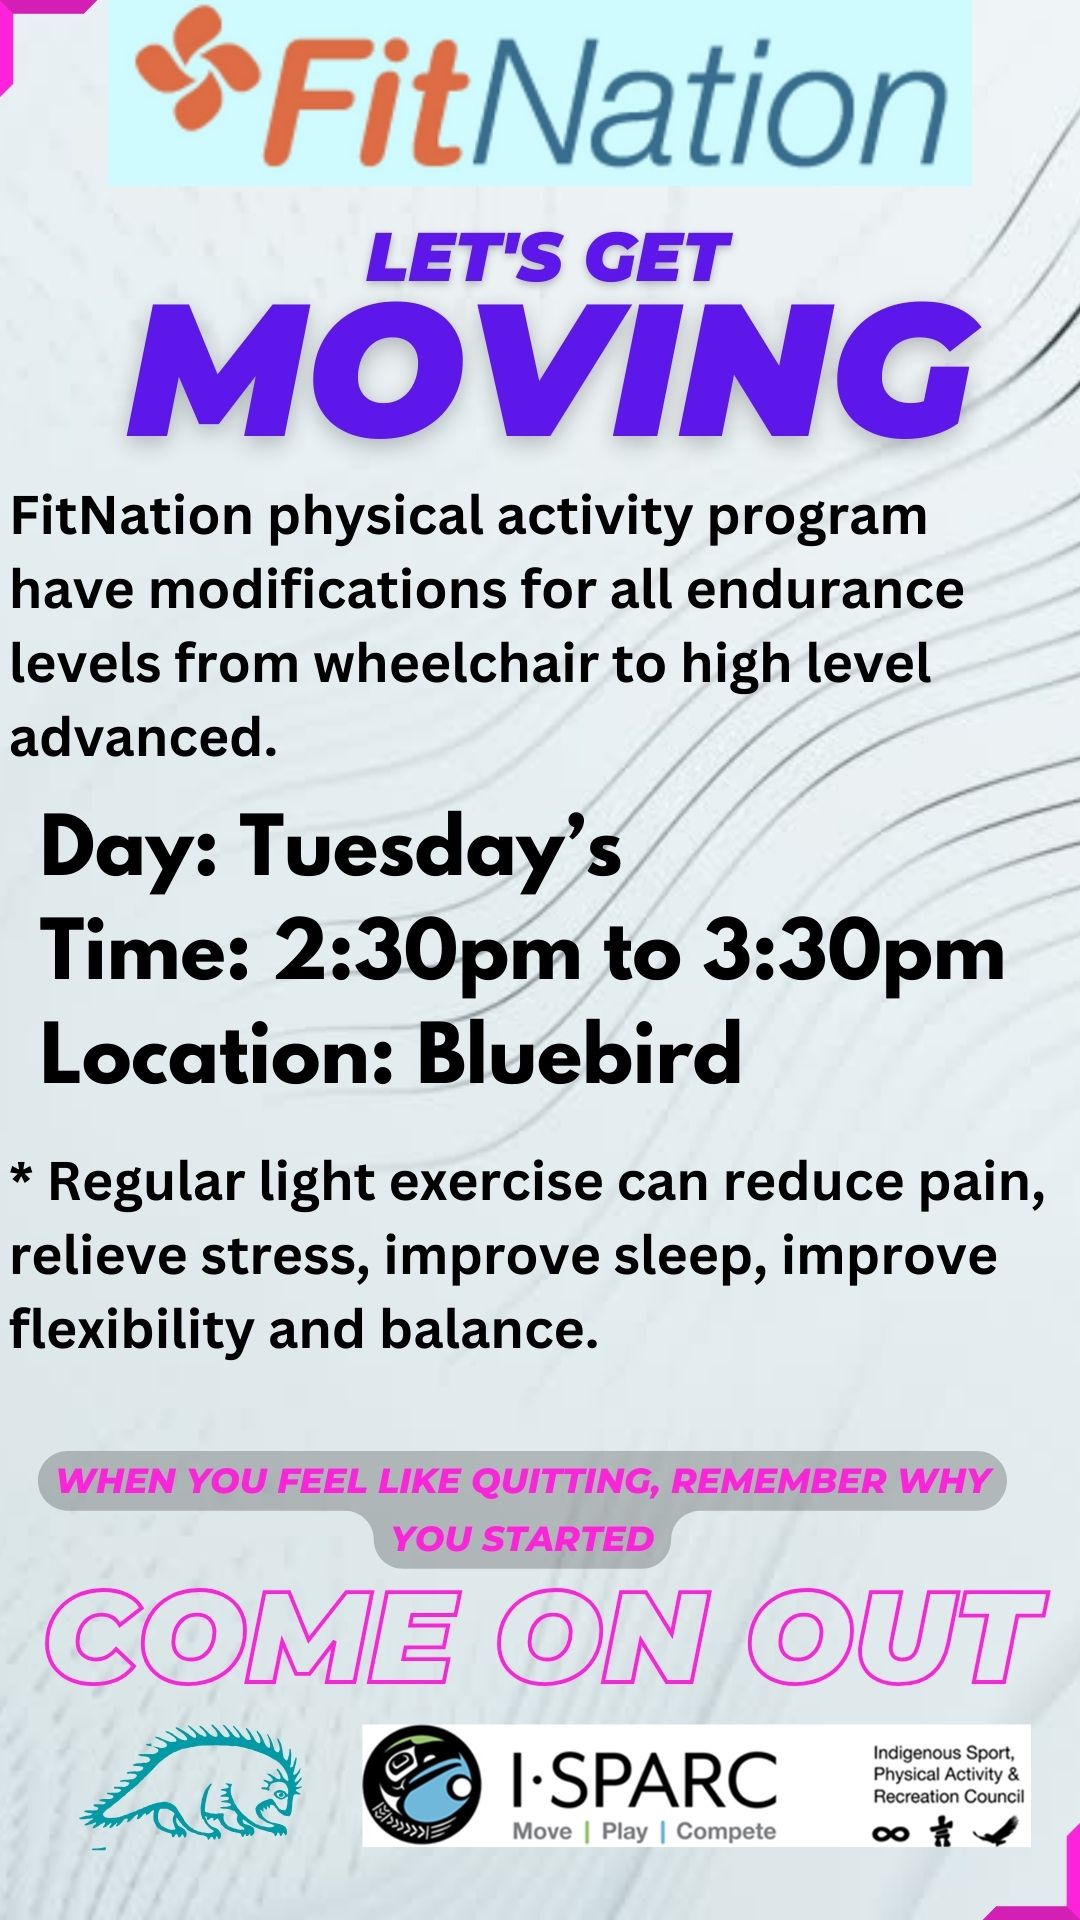 Fit Nation – Tuesdays from 2:30-3:30pm at the Bluebird building